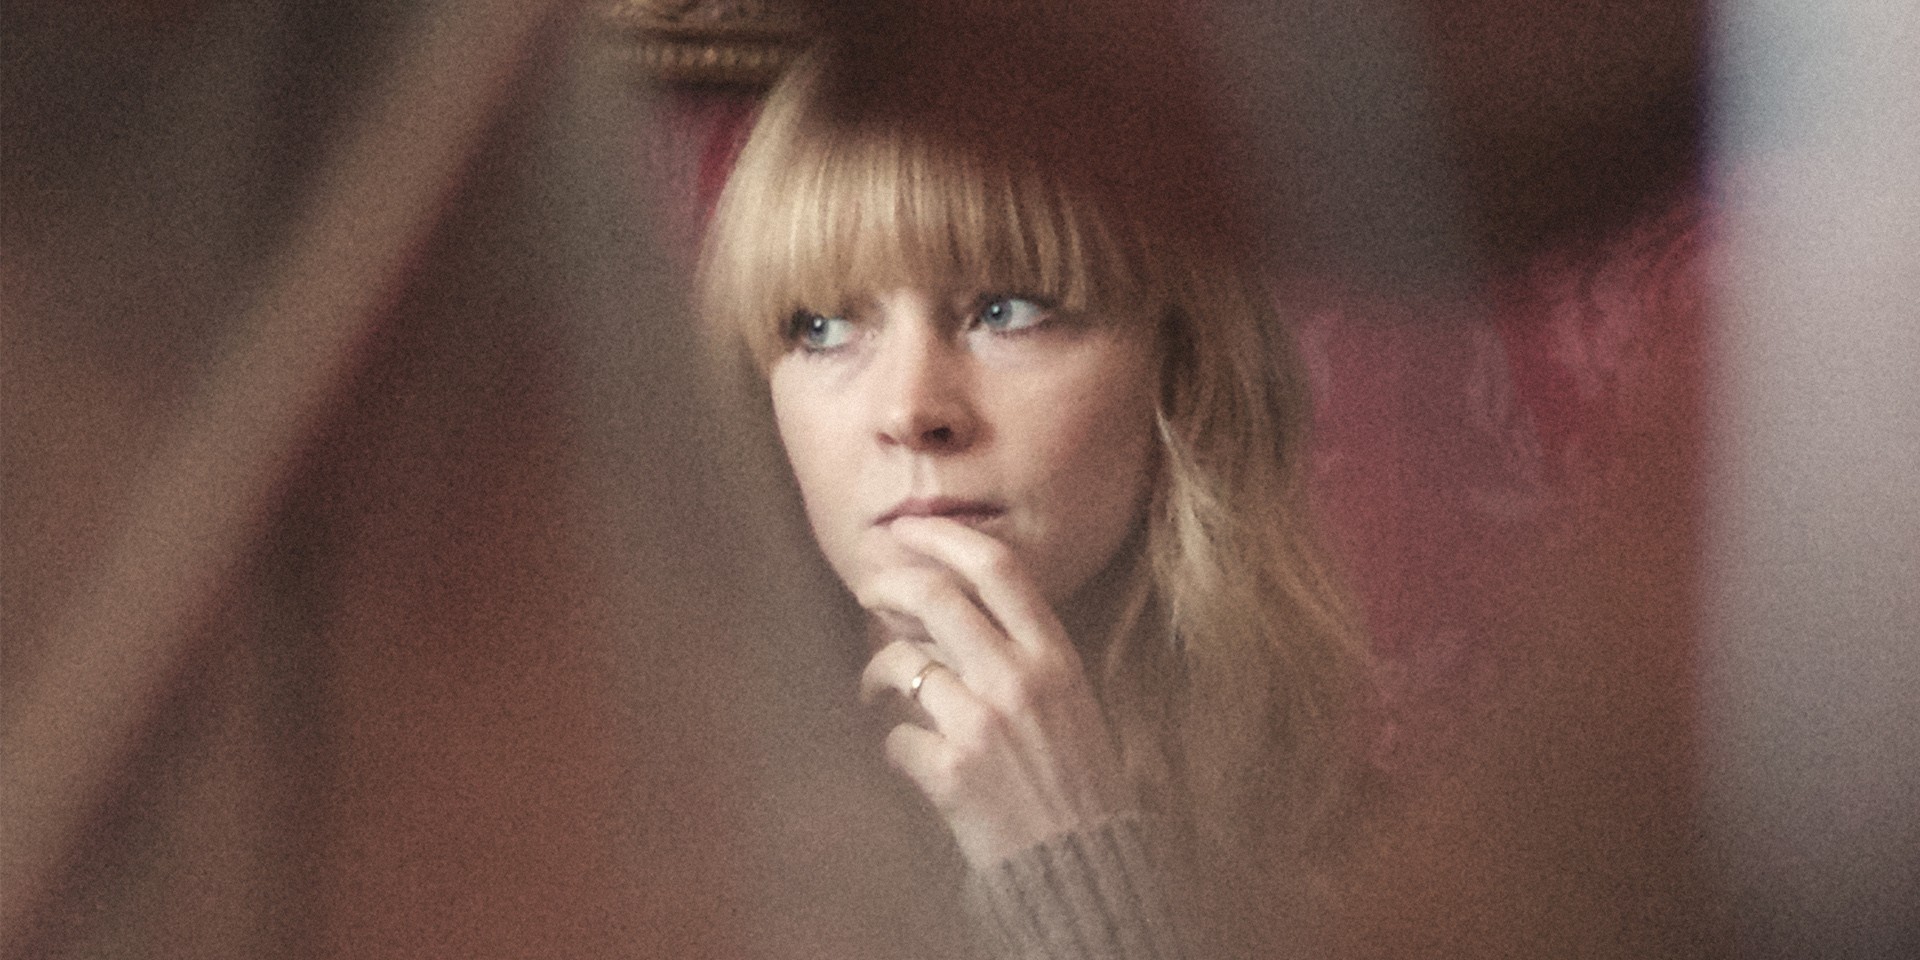 Lucy Rose announces Worldwide Cinema Tour 2017, with concerts in Manila and Singapore